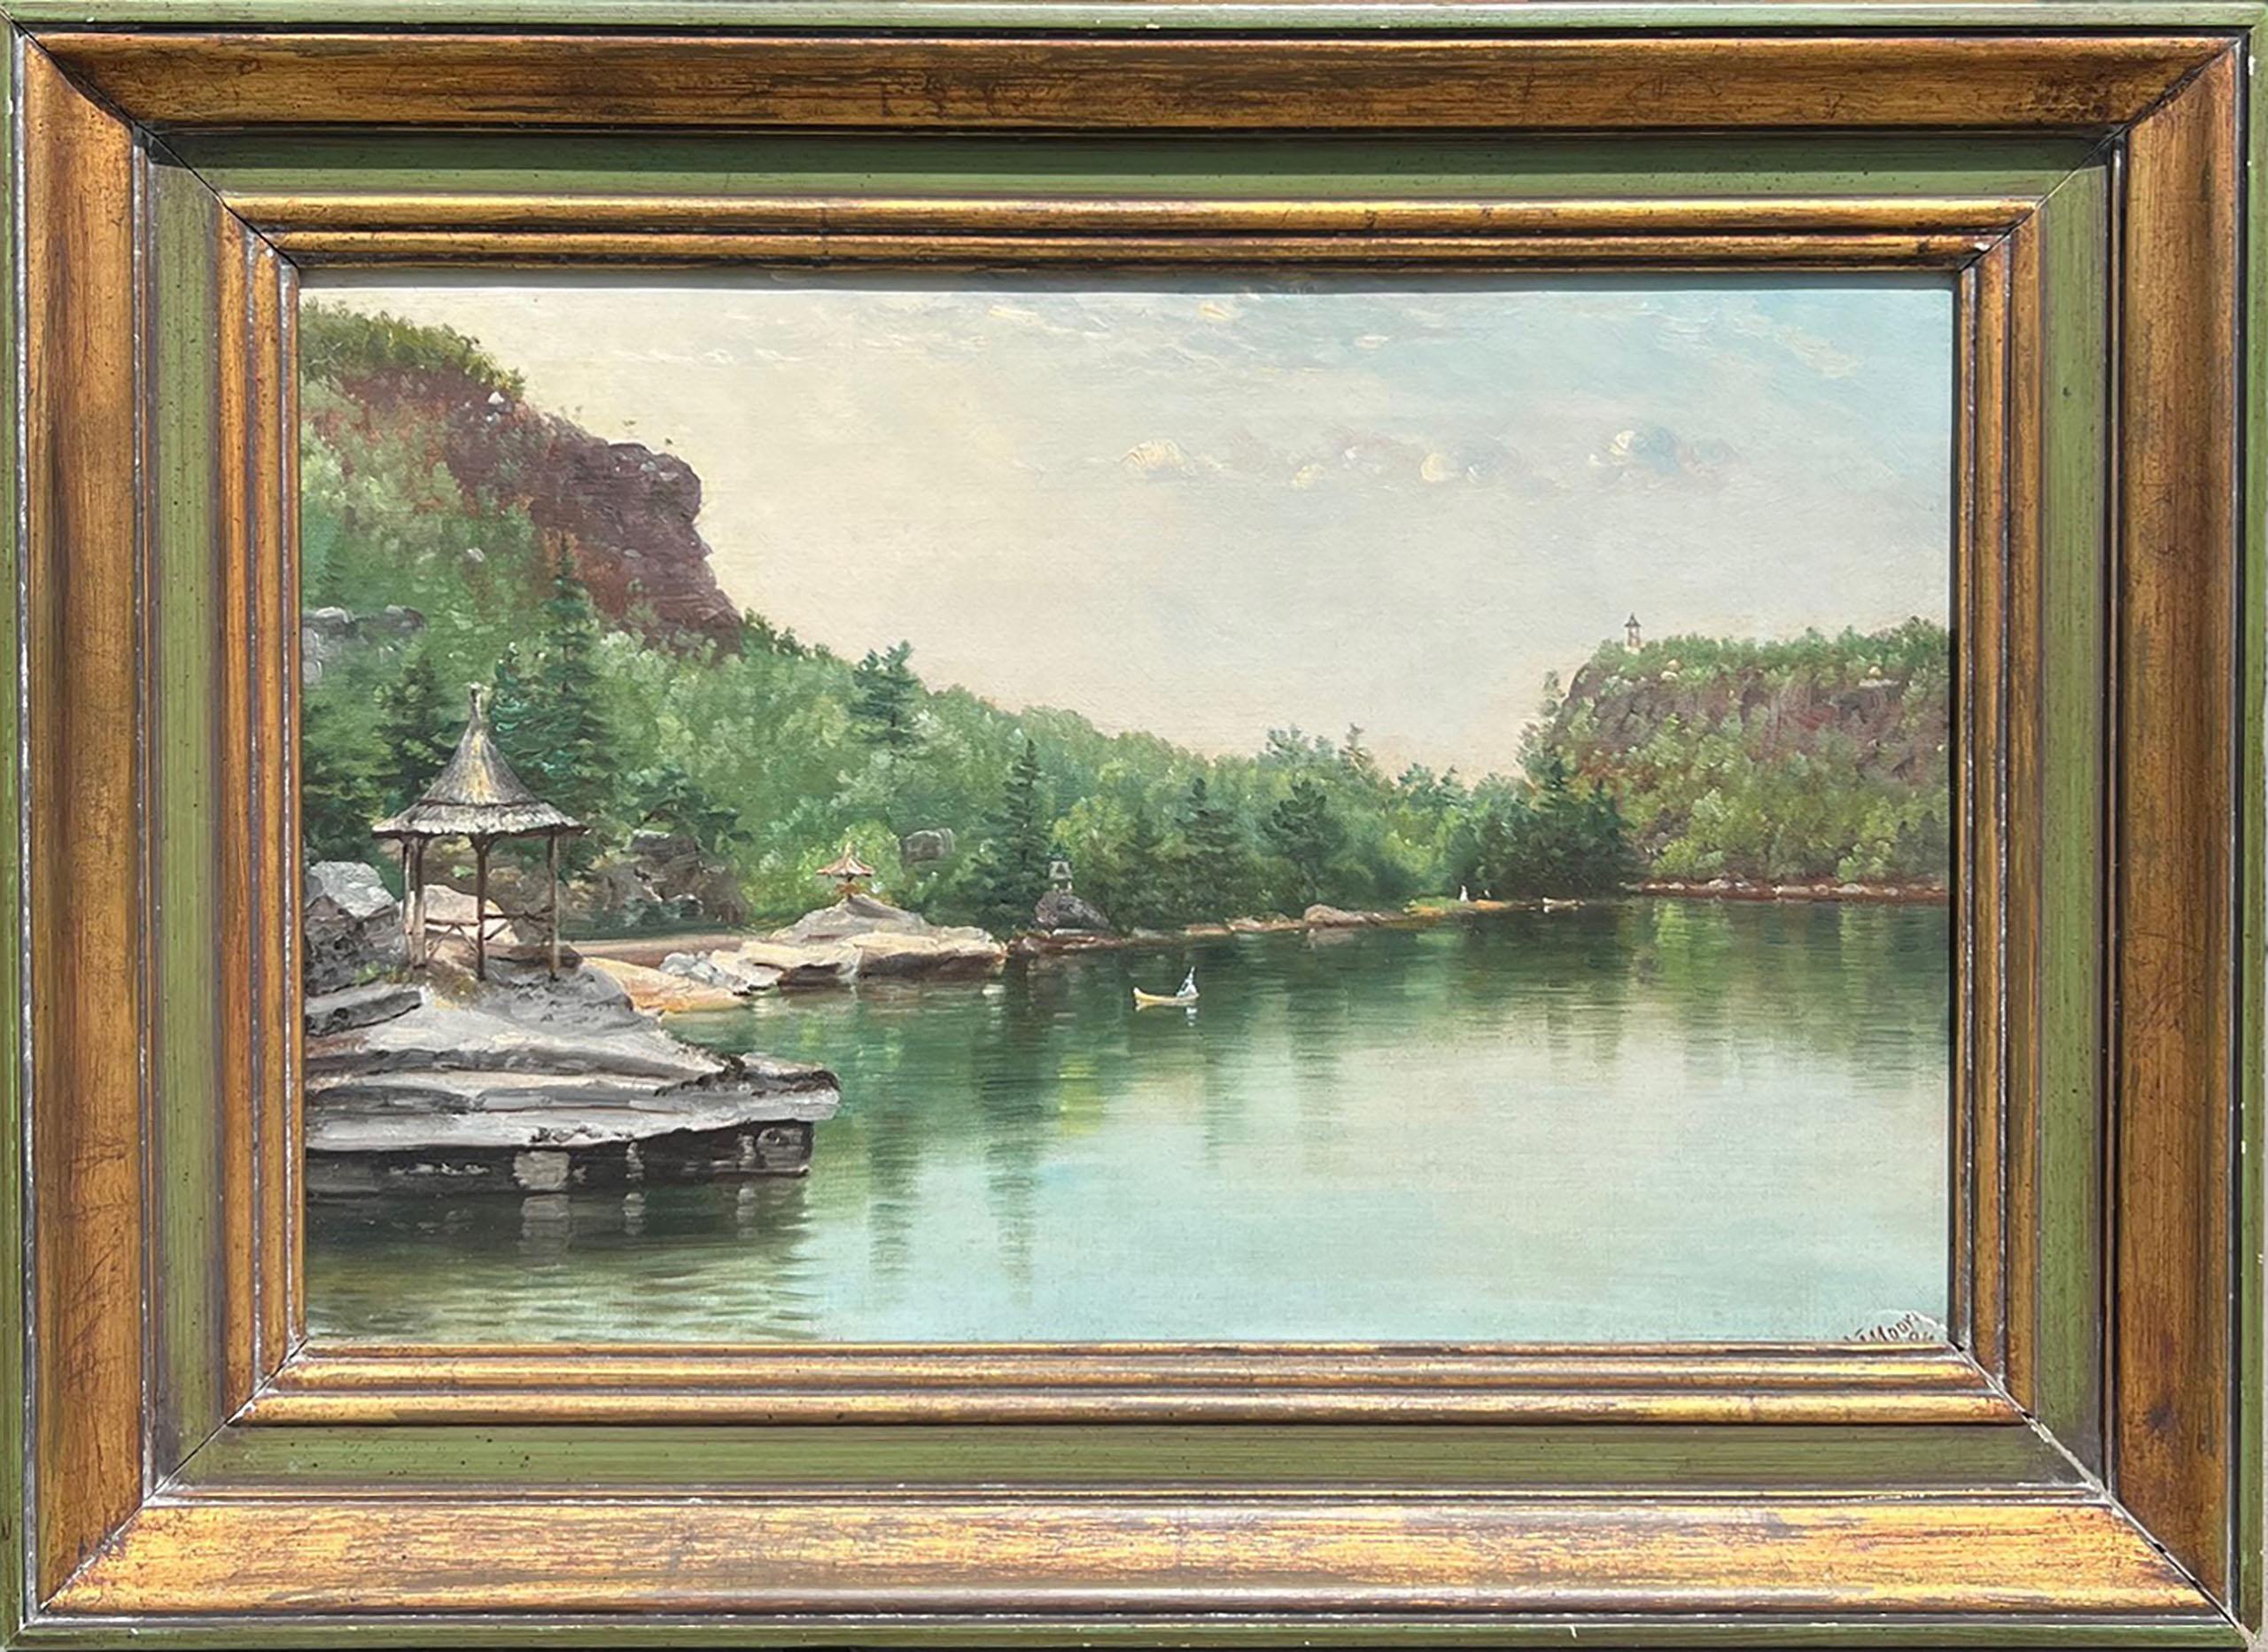 A rare depiction of Lake Mohonk, this painting by Hudson River School artist Nelson Augustus Moore (1824-1902) features  Sky Top Tower and the serene natural surroundings of the historic Mohonk Mountain House. This 19th century oil painting on